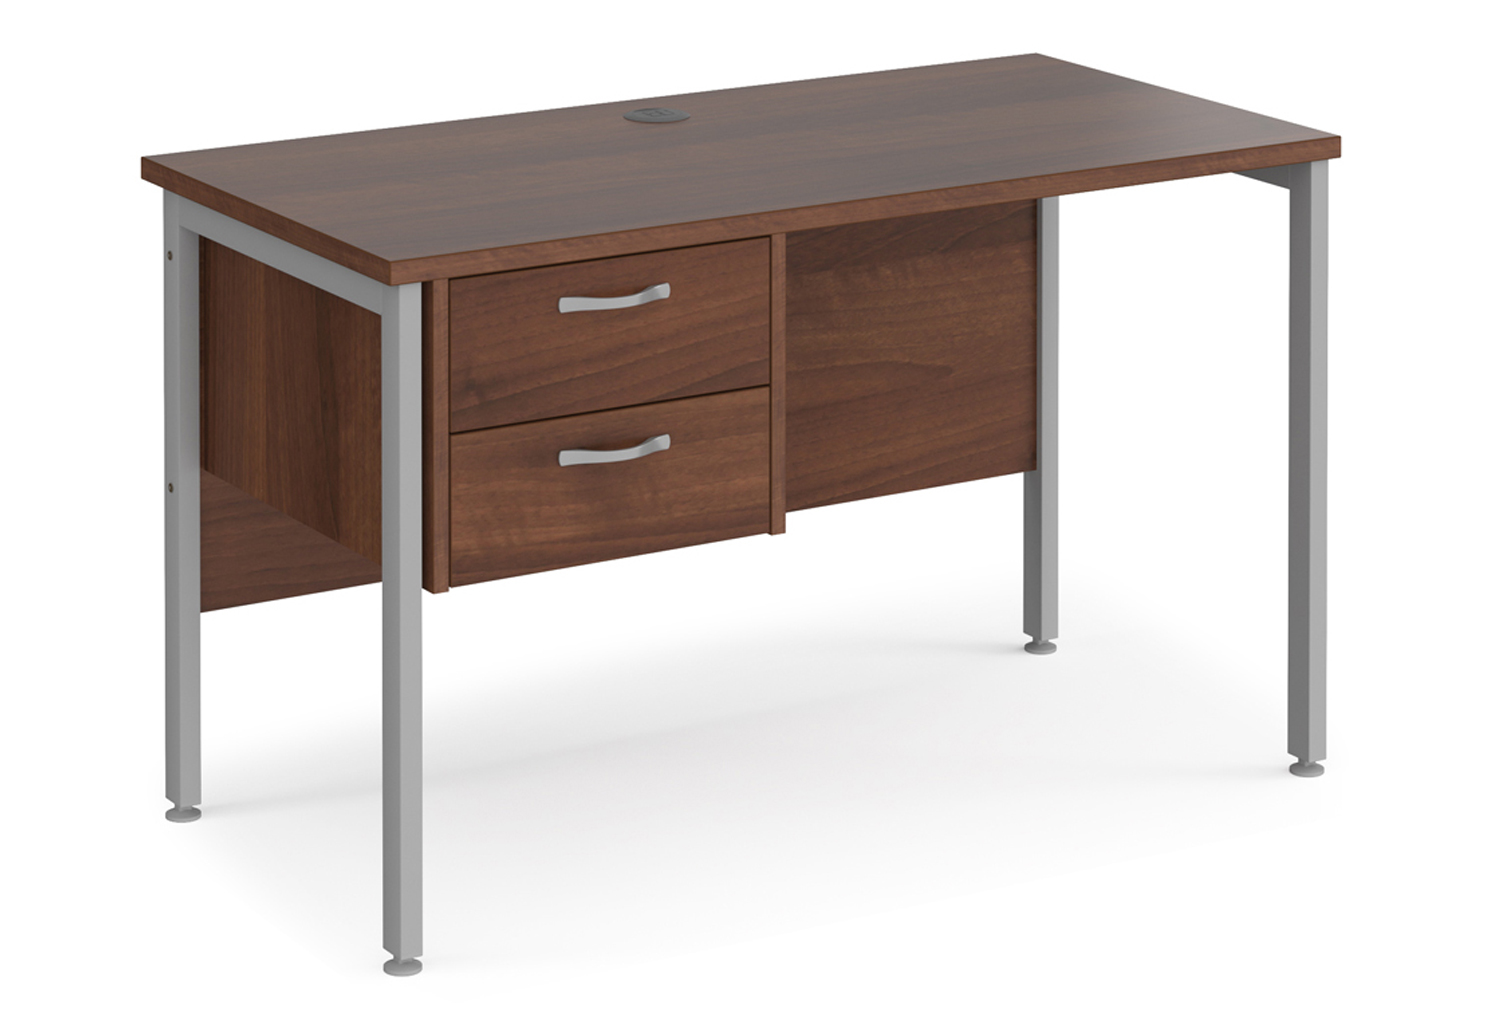 Value Line Deluxe H-Leg Narrow Rectangular Office Desk 2 Drawers (Silver Legs), 120w60dx73h (cm), Walnut, Express Delivery